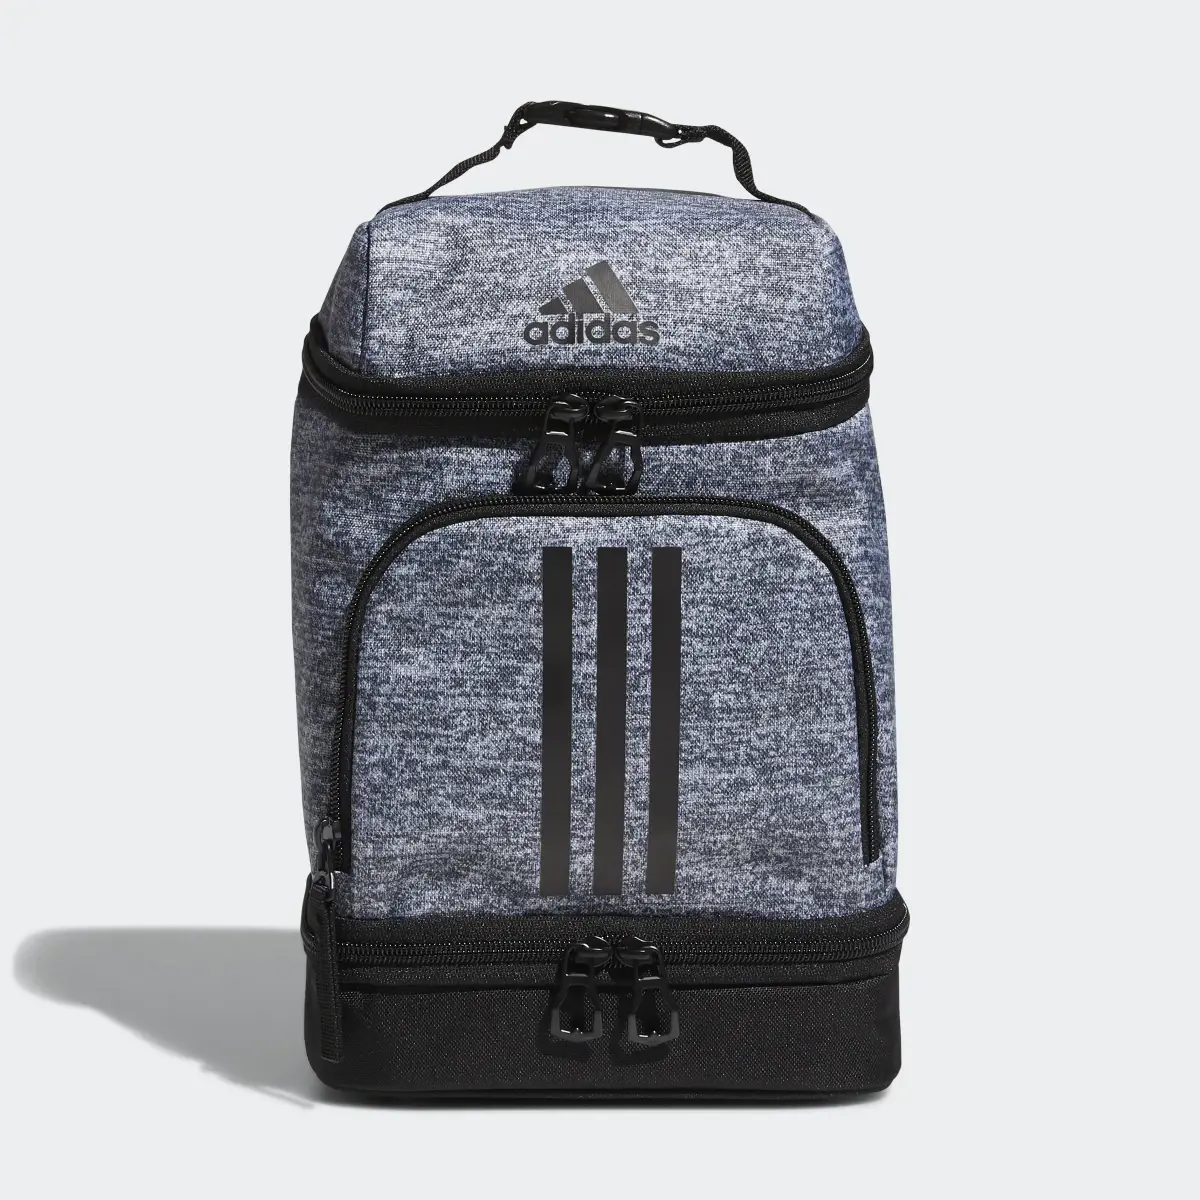 Adidas Excel Lunch Bag. 2